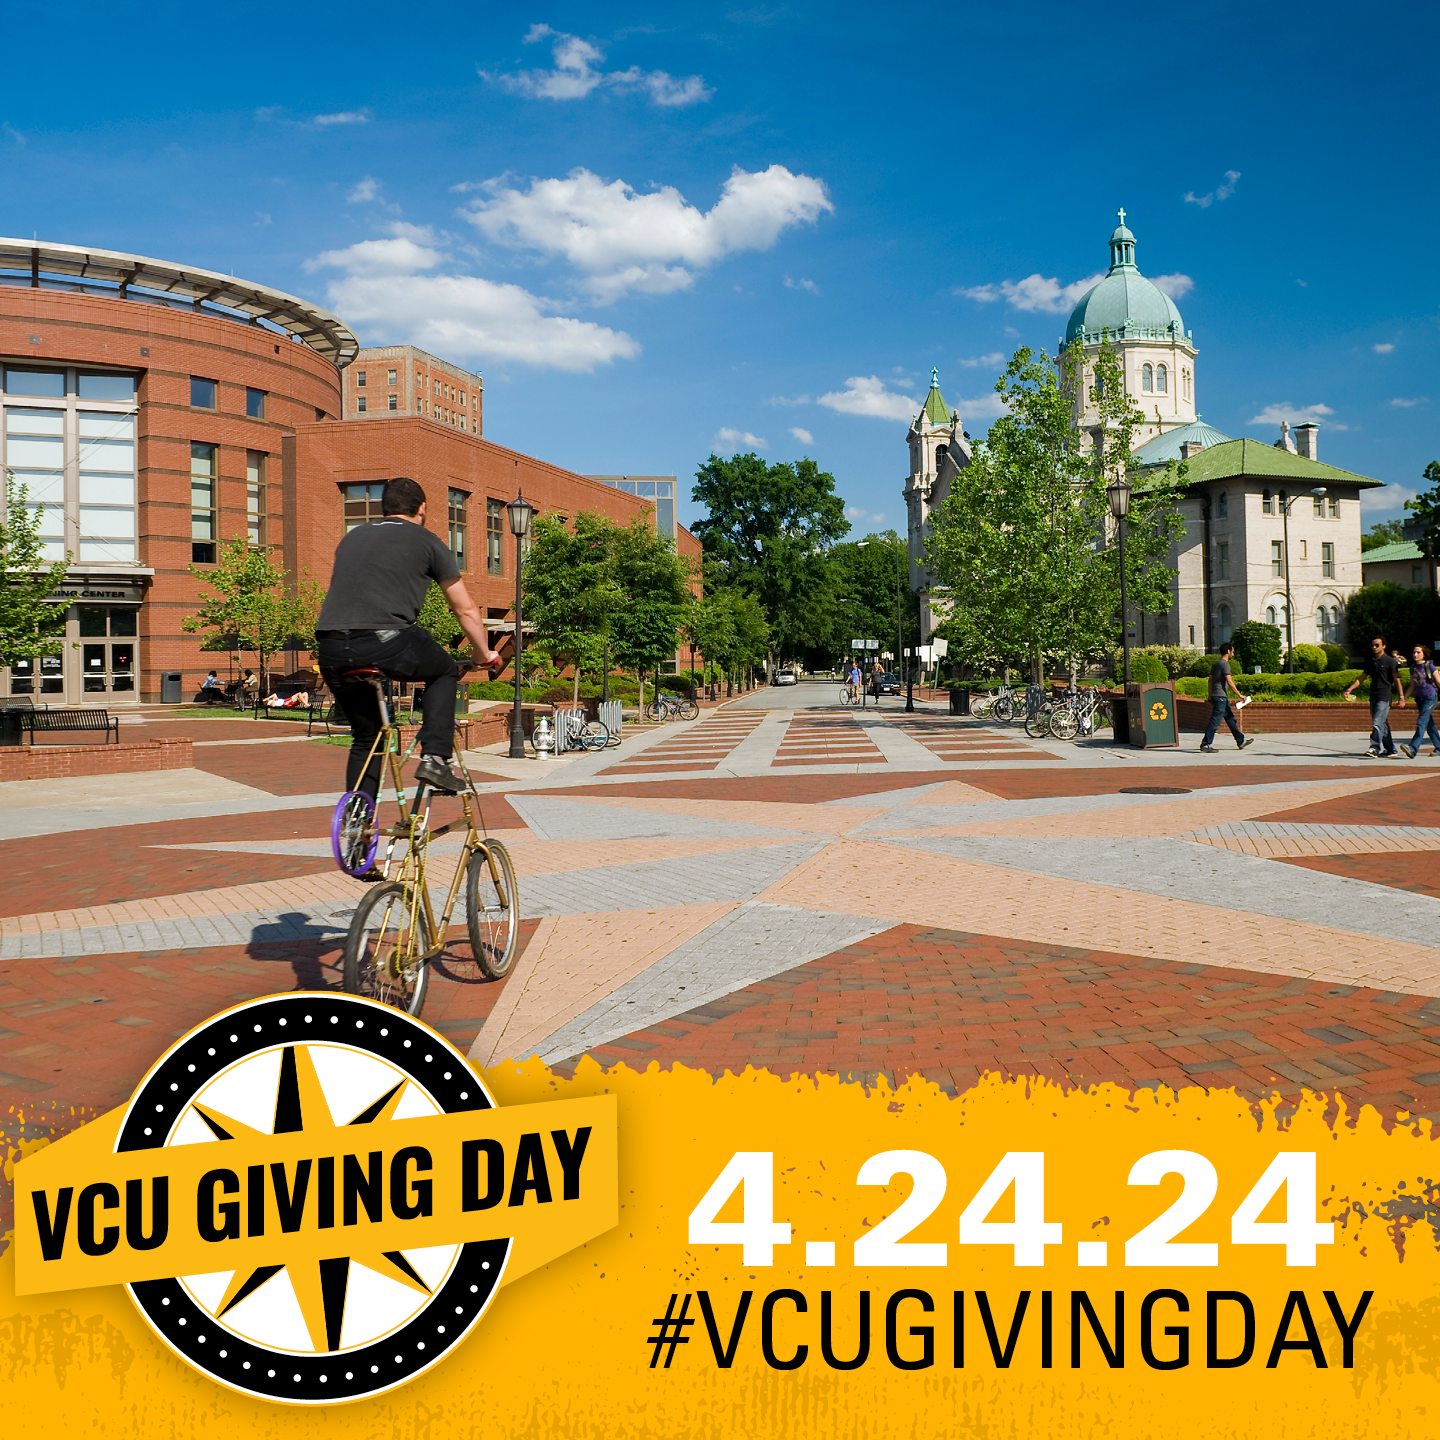 VCU Giving Day